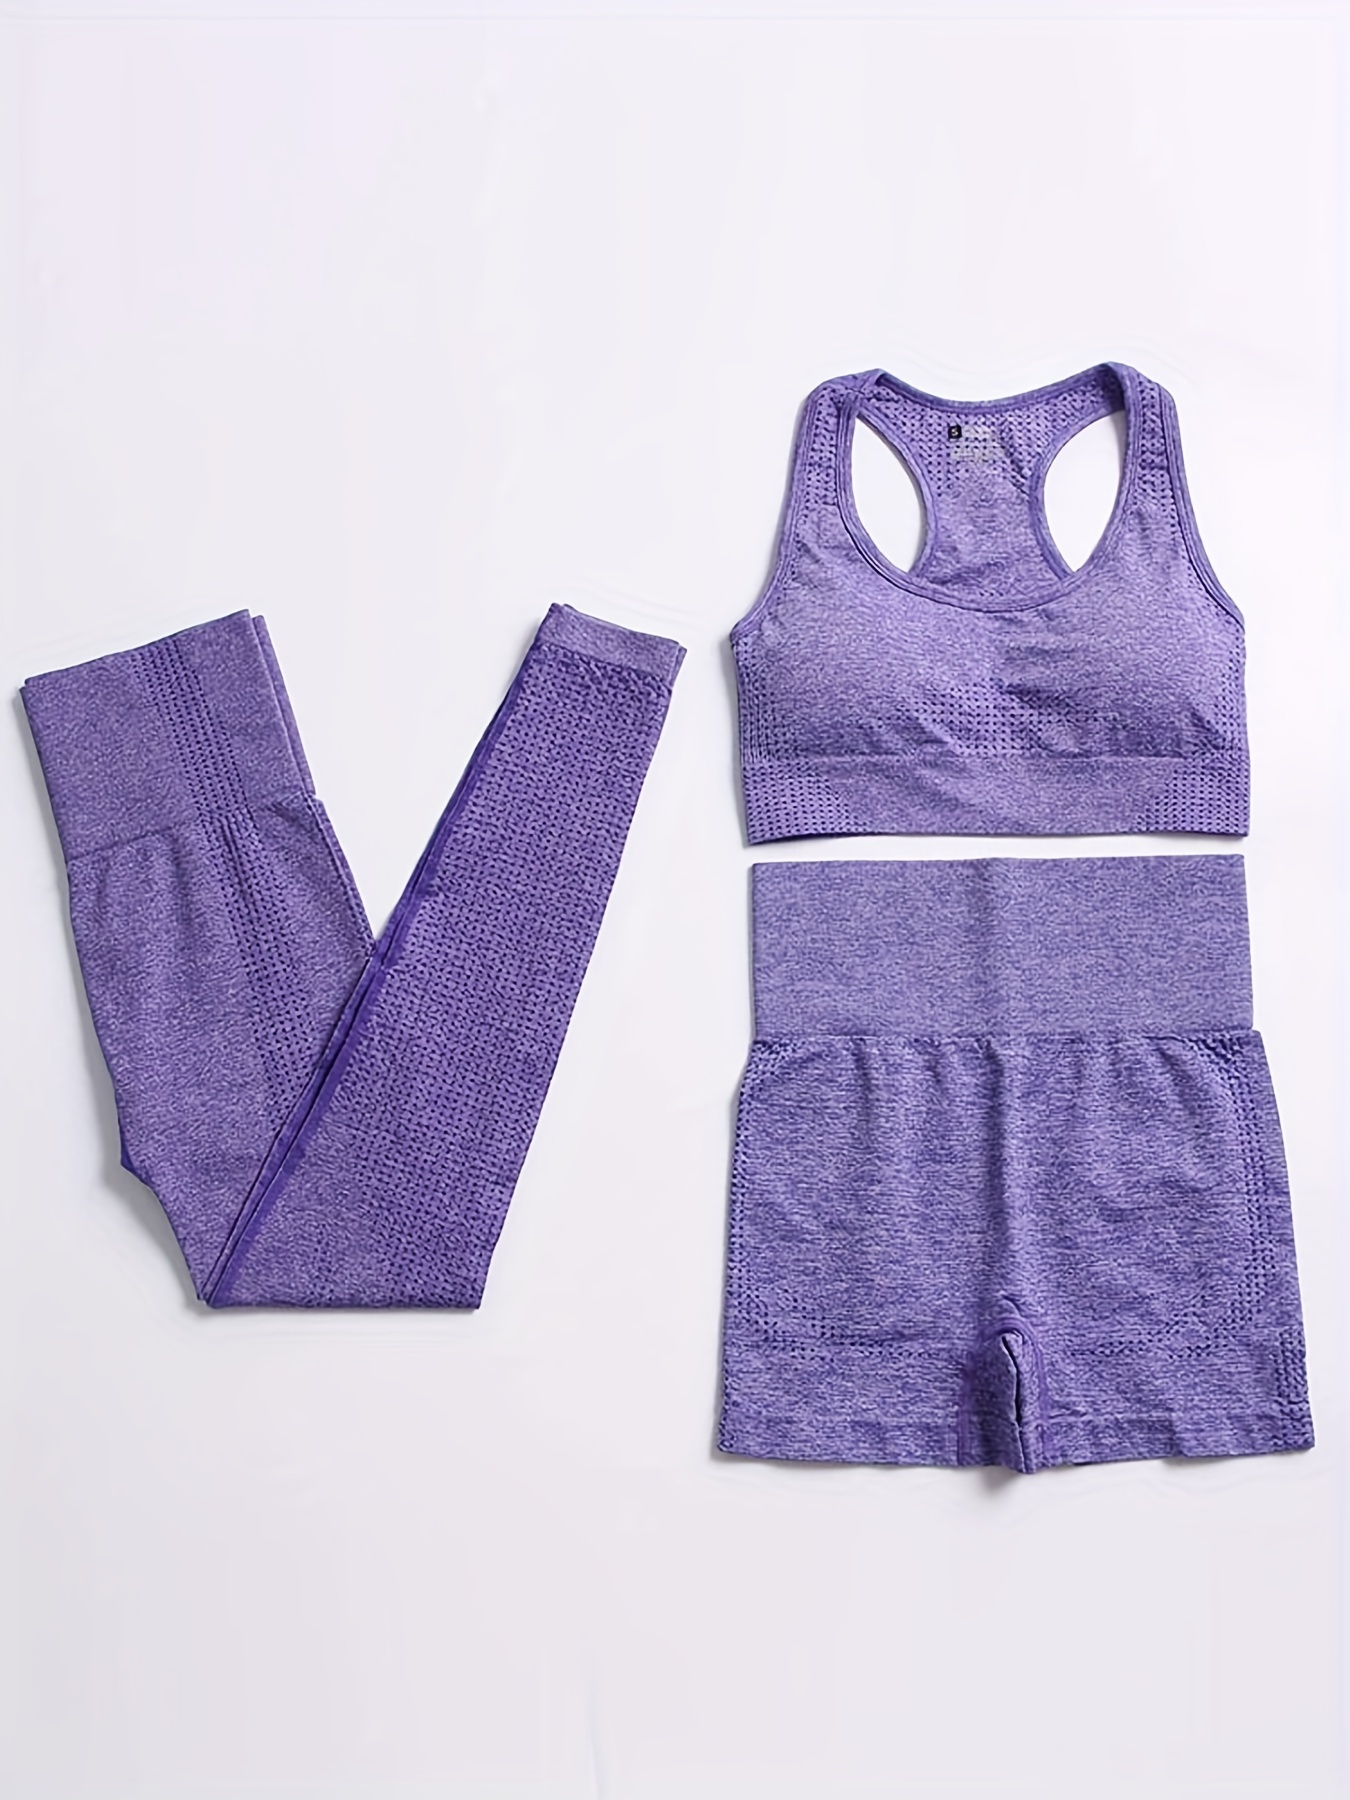 pHERfect Fit  High-Quality Active Wear for Women